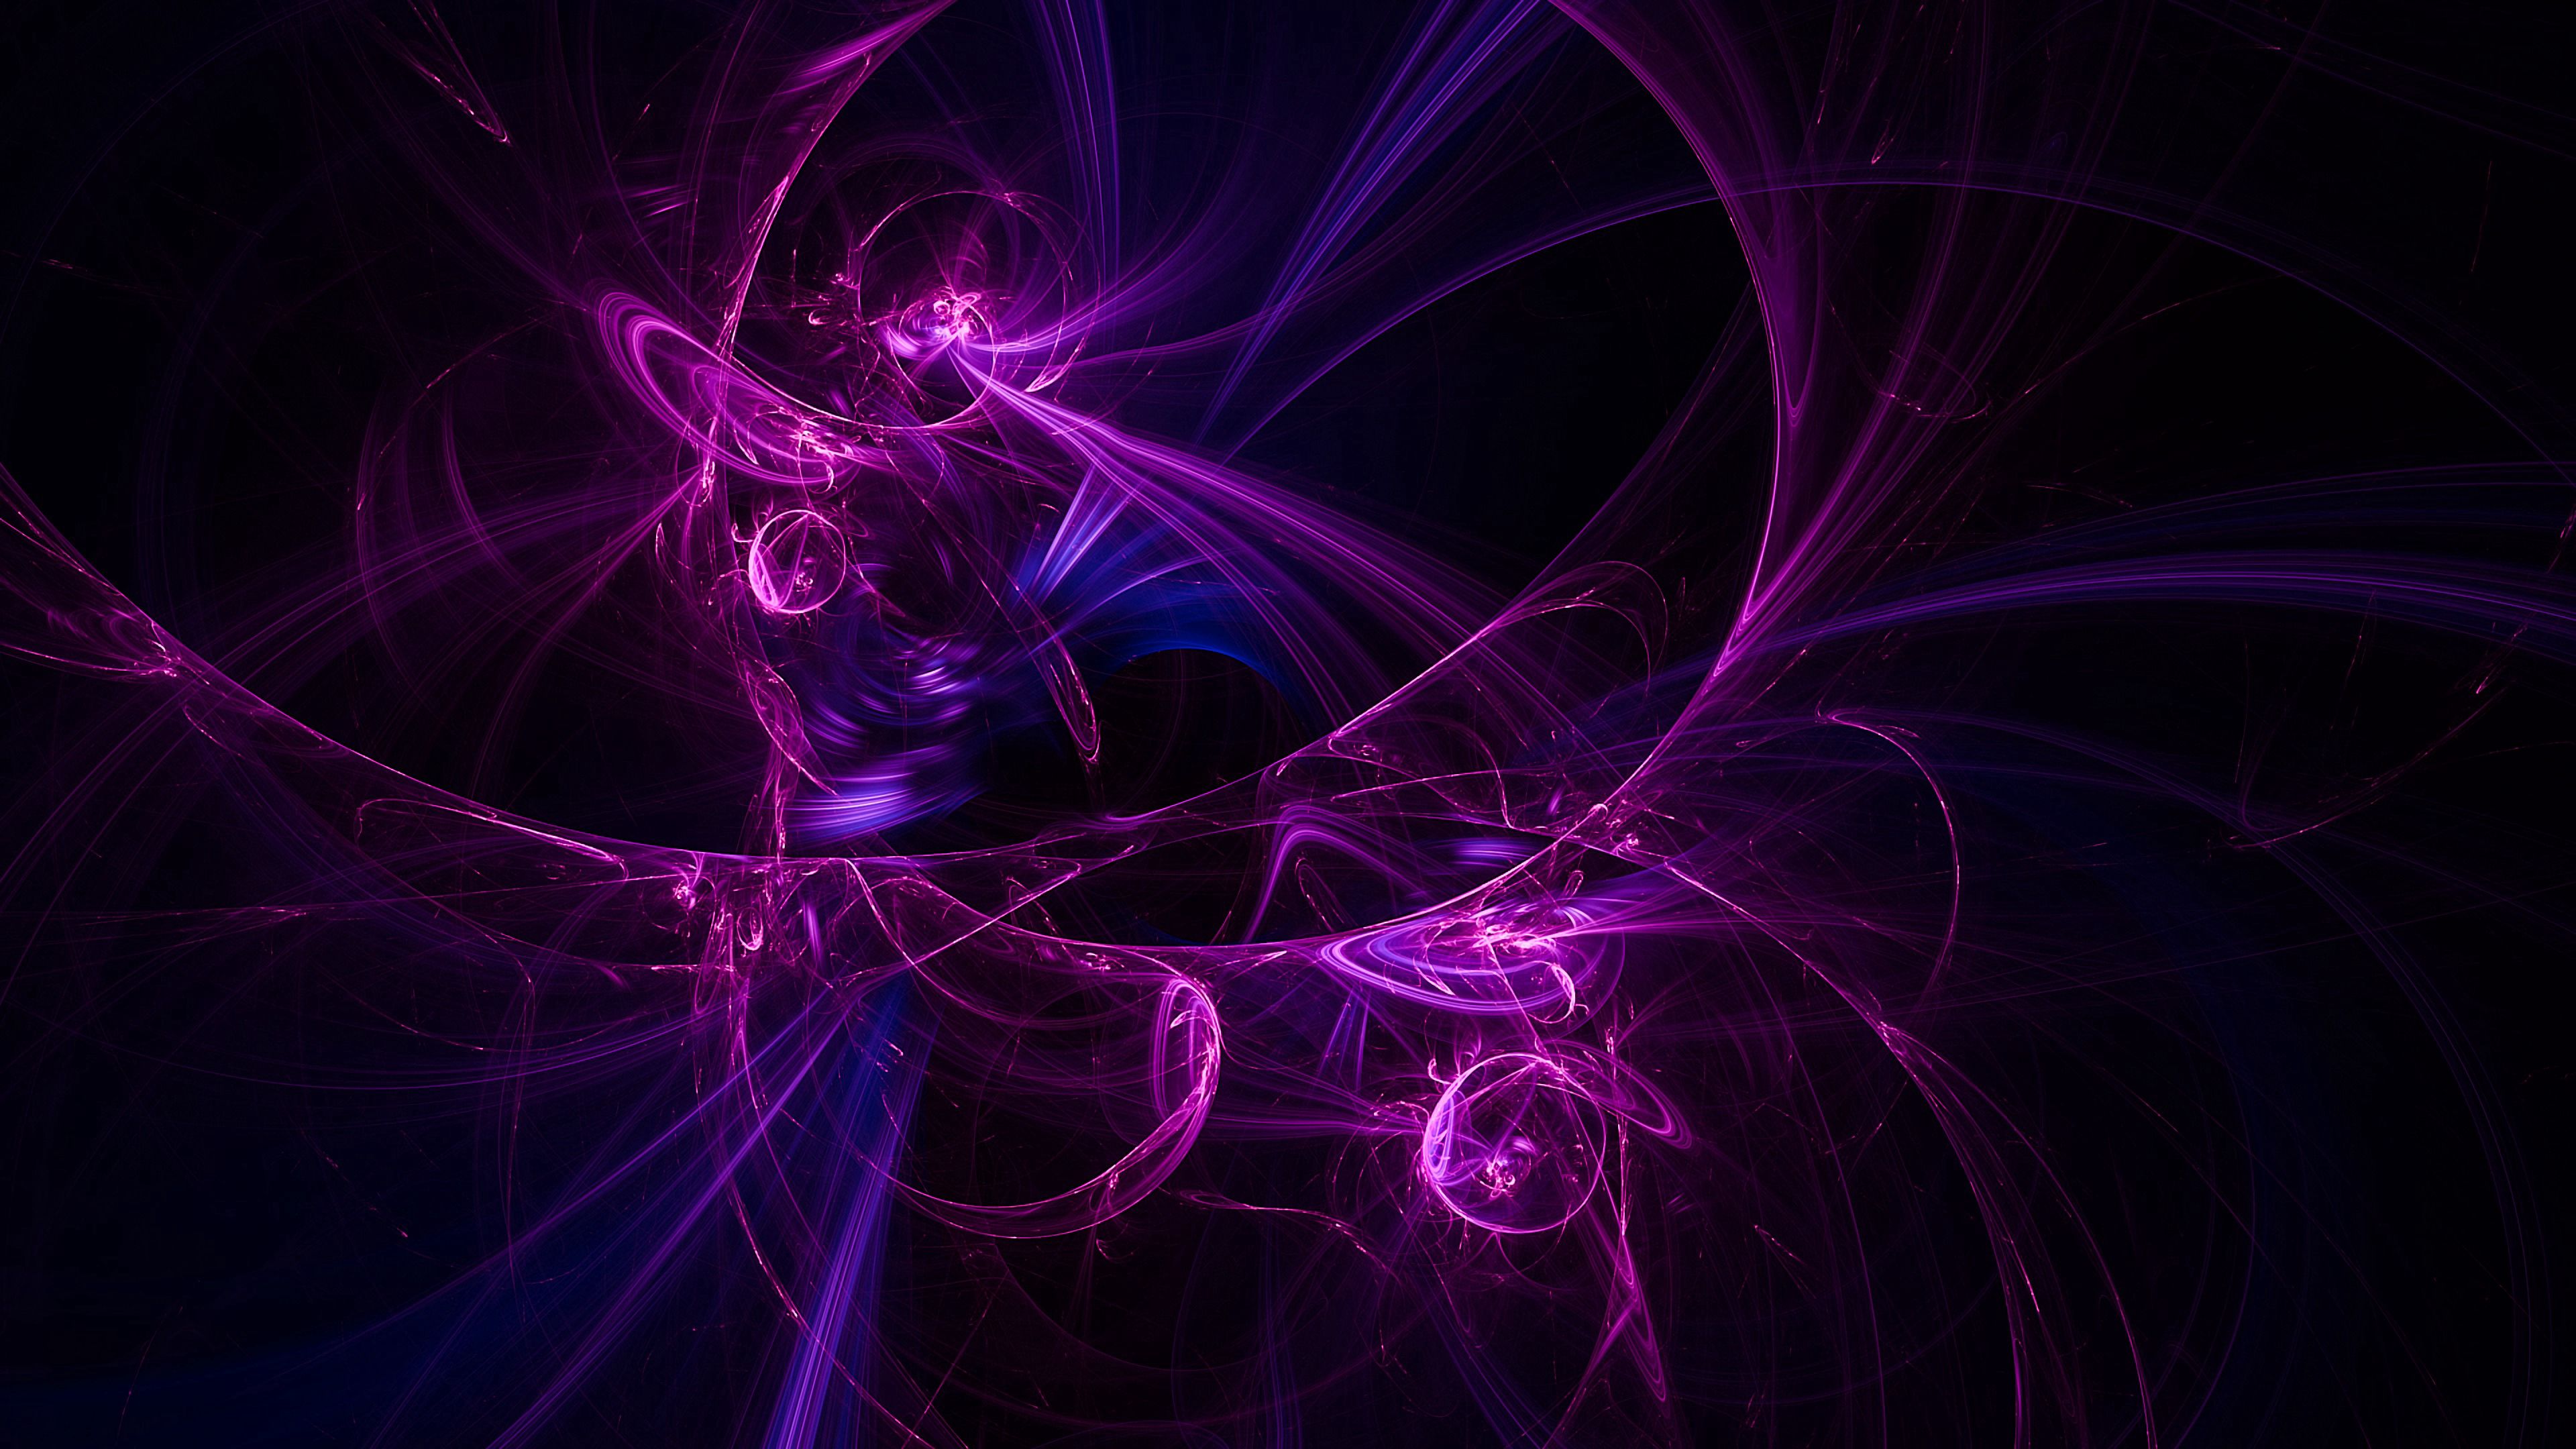 purple, abstract, violet, beams, rays, fractal, radiation iphone wallpaper